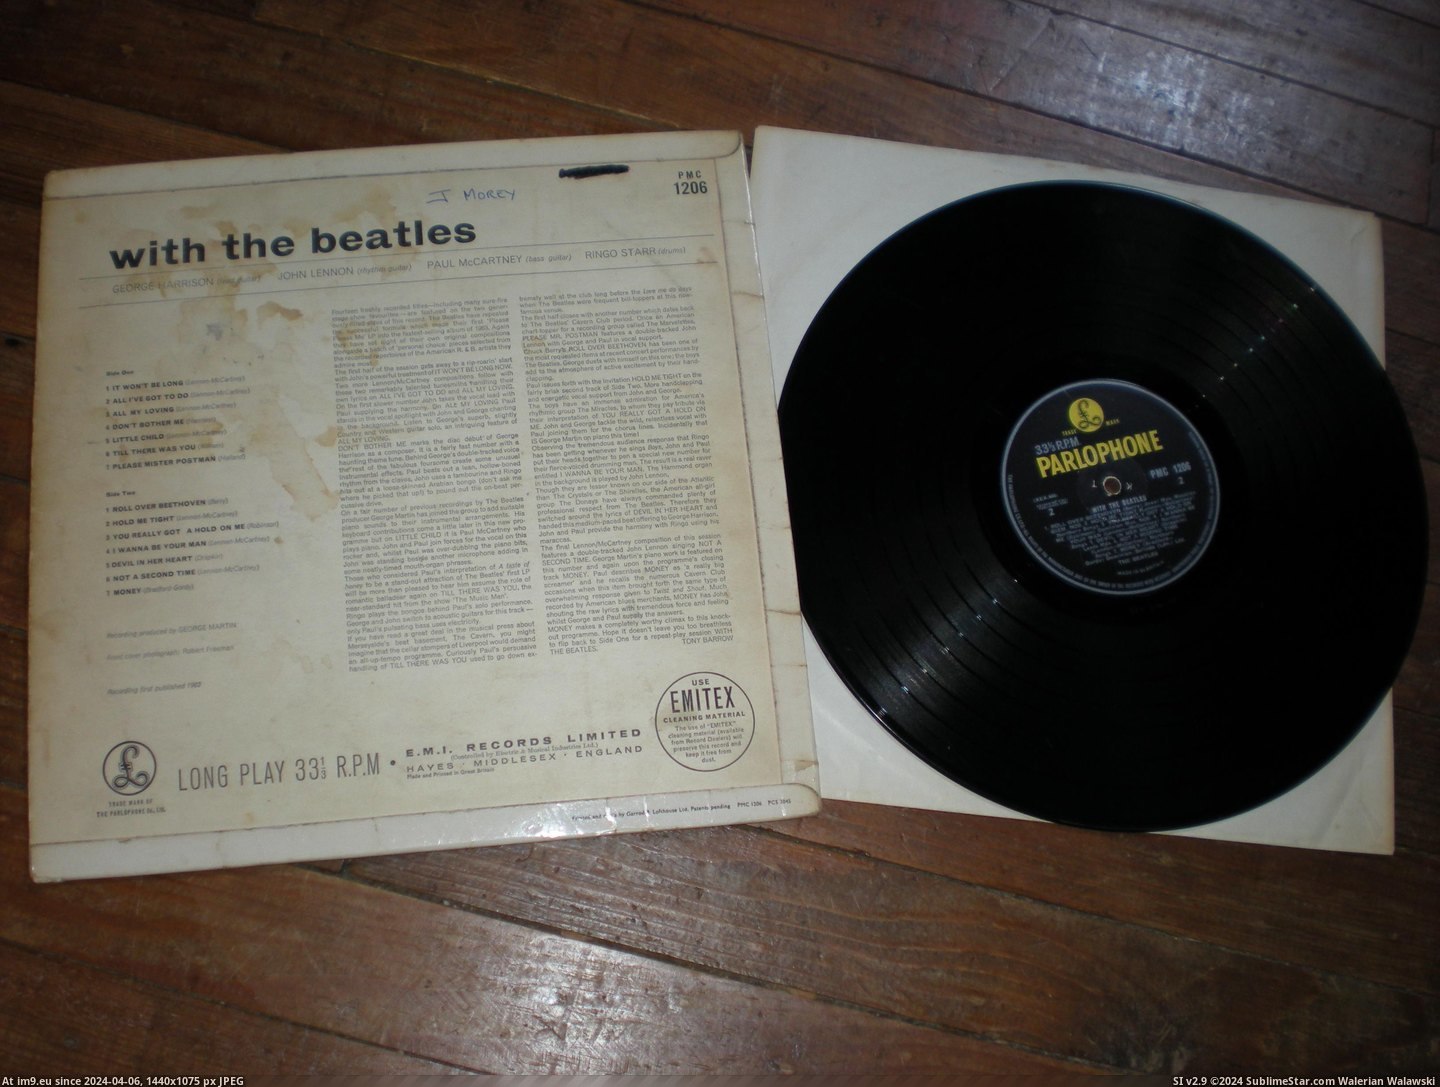  #Beatles  With The Beatles 7N 4 Pic. (Image of album new 1))